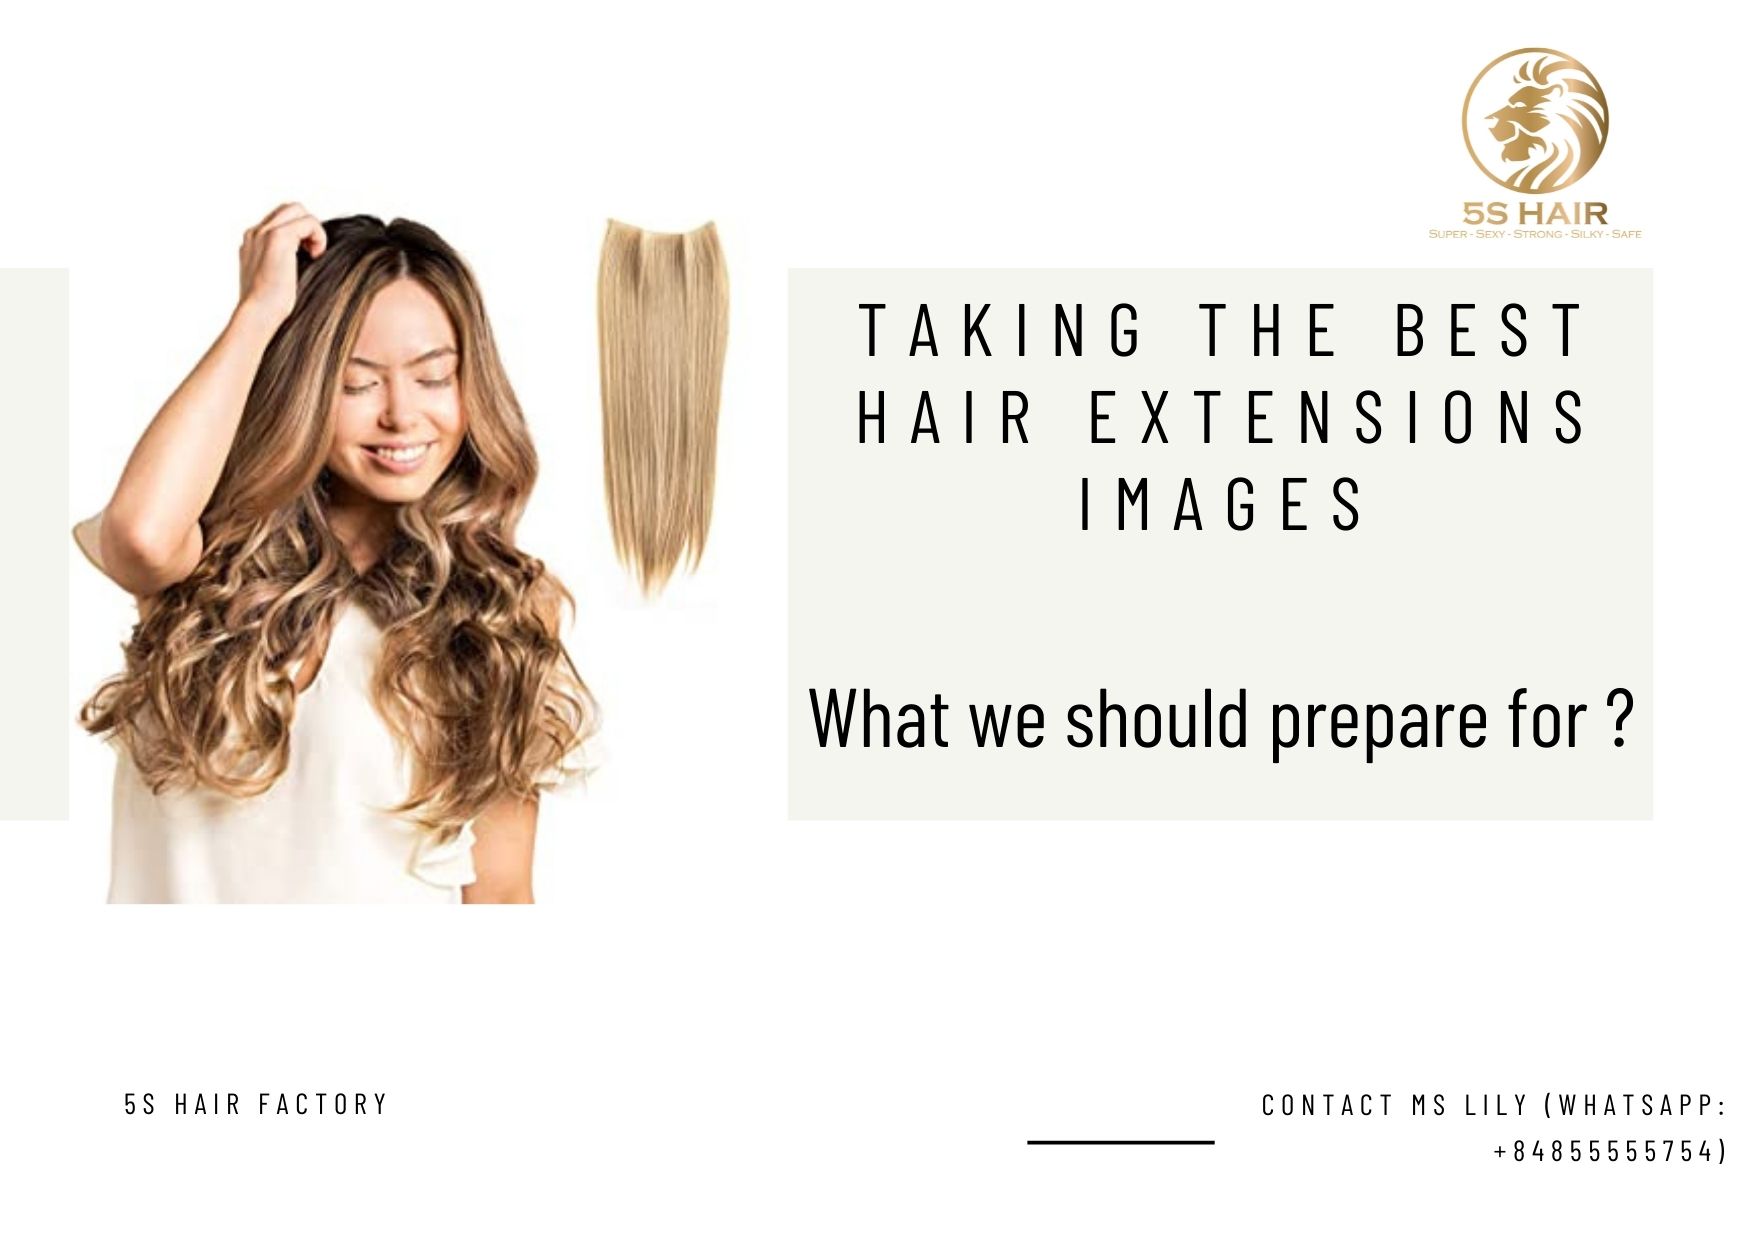 Taking the best hair extensions images - What we should prepare for